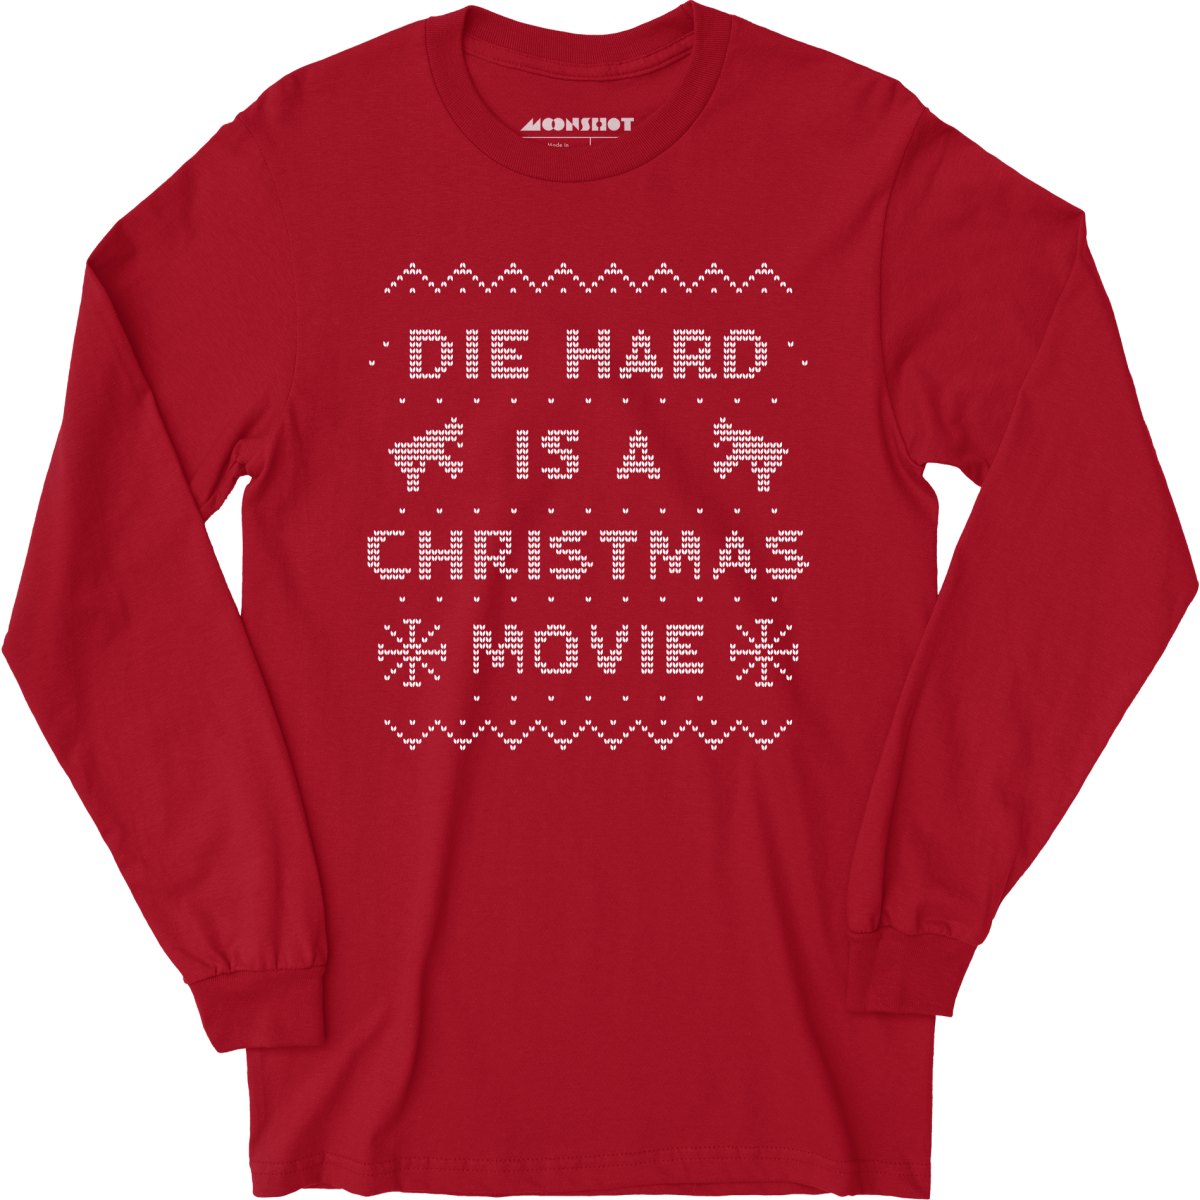 Die Hard is a Christmas Movie - Sweater Print Style - Long Sleeve T-Shirt